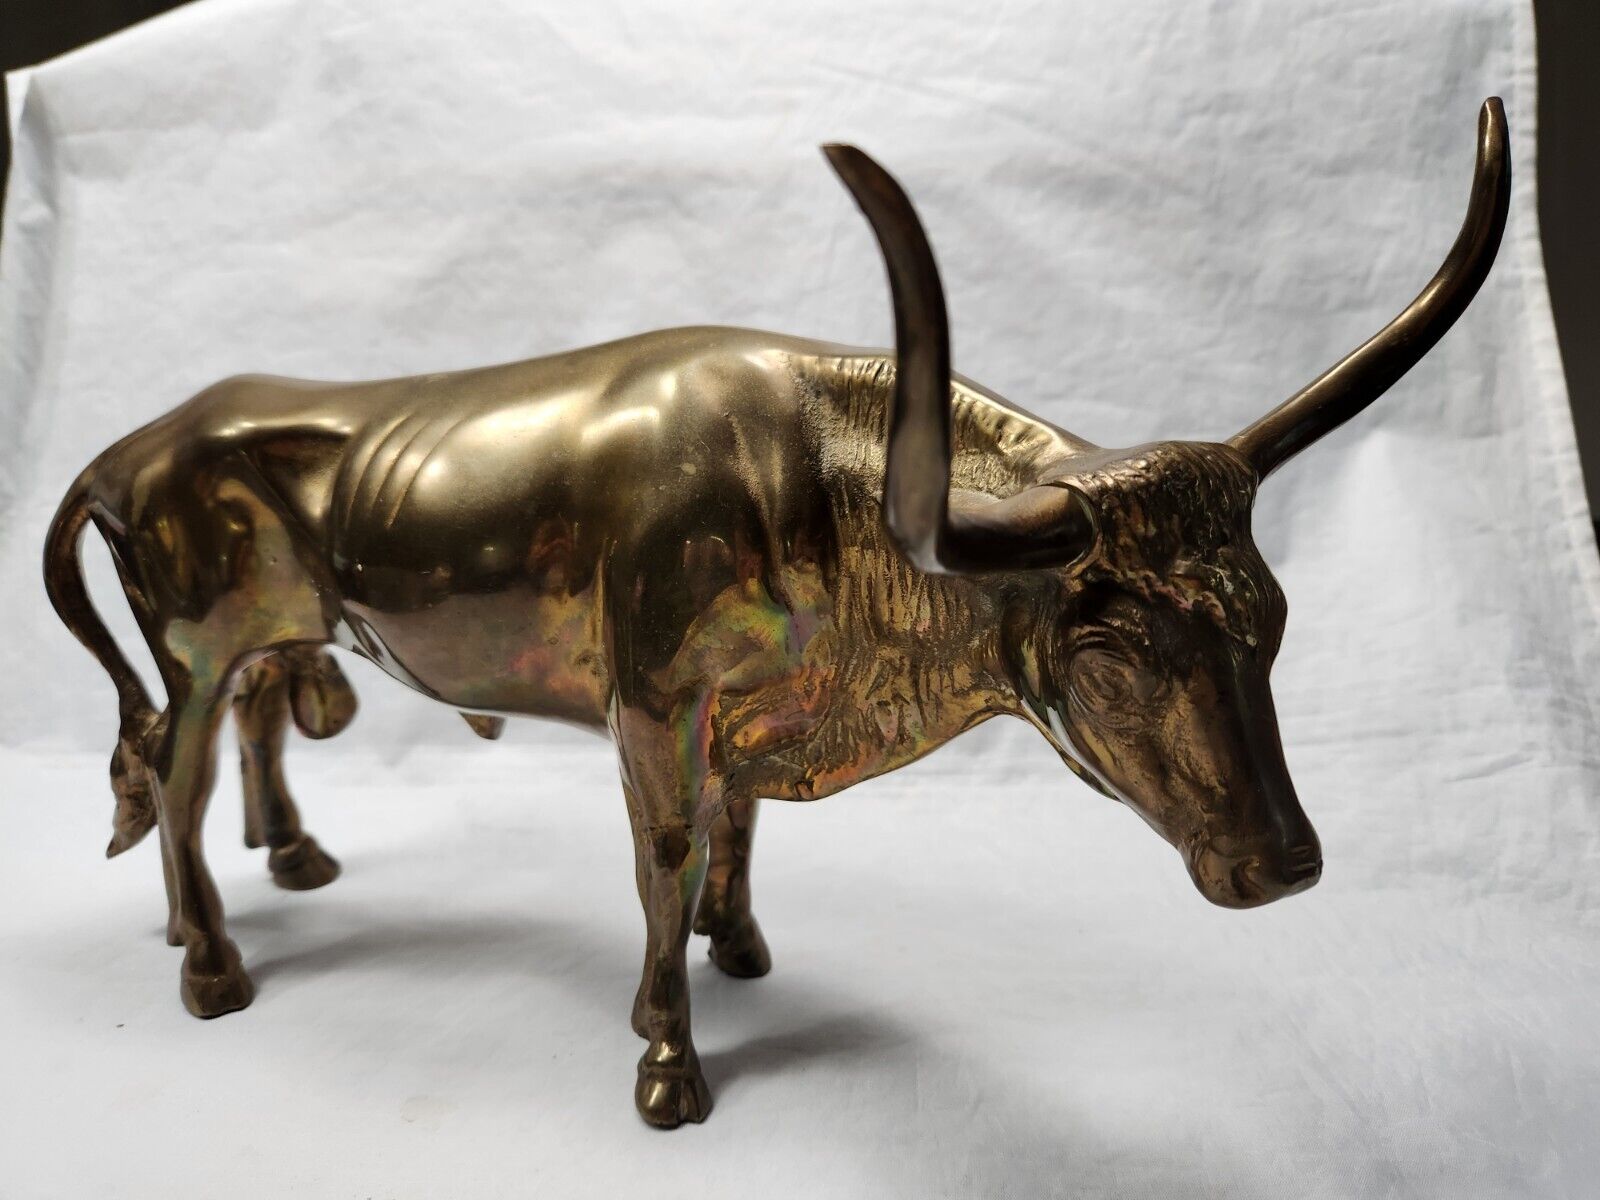 Brass Longhorn Steer Figure 5 lbs Anatomically Correct Country Farm Rodeo Decor